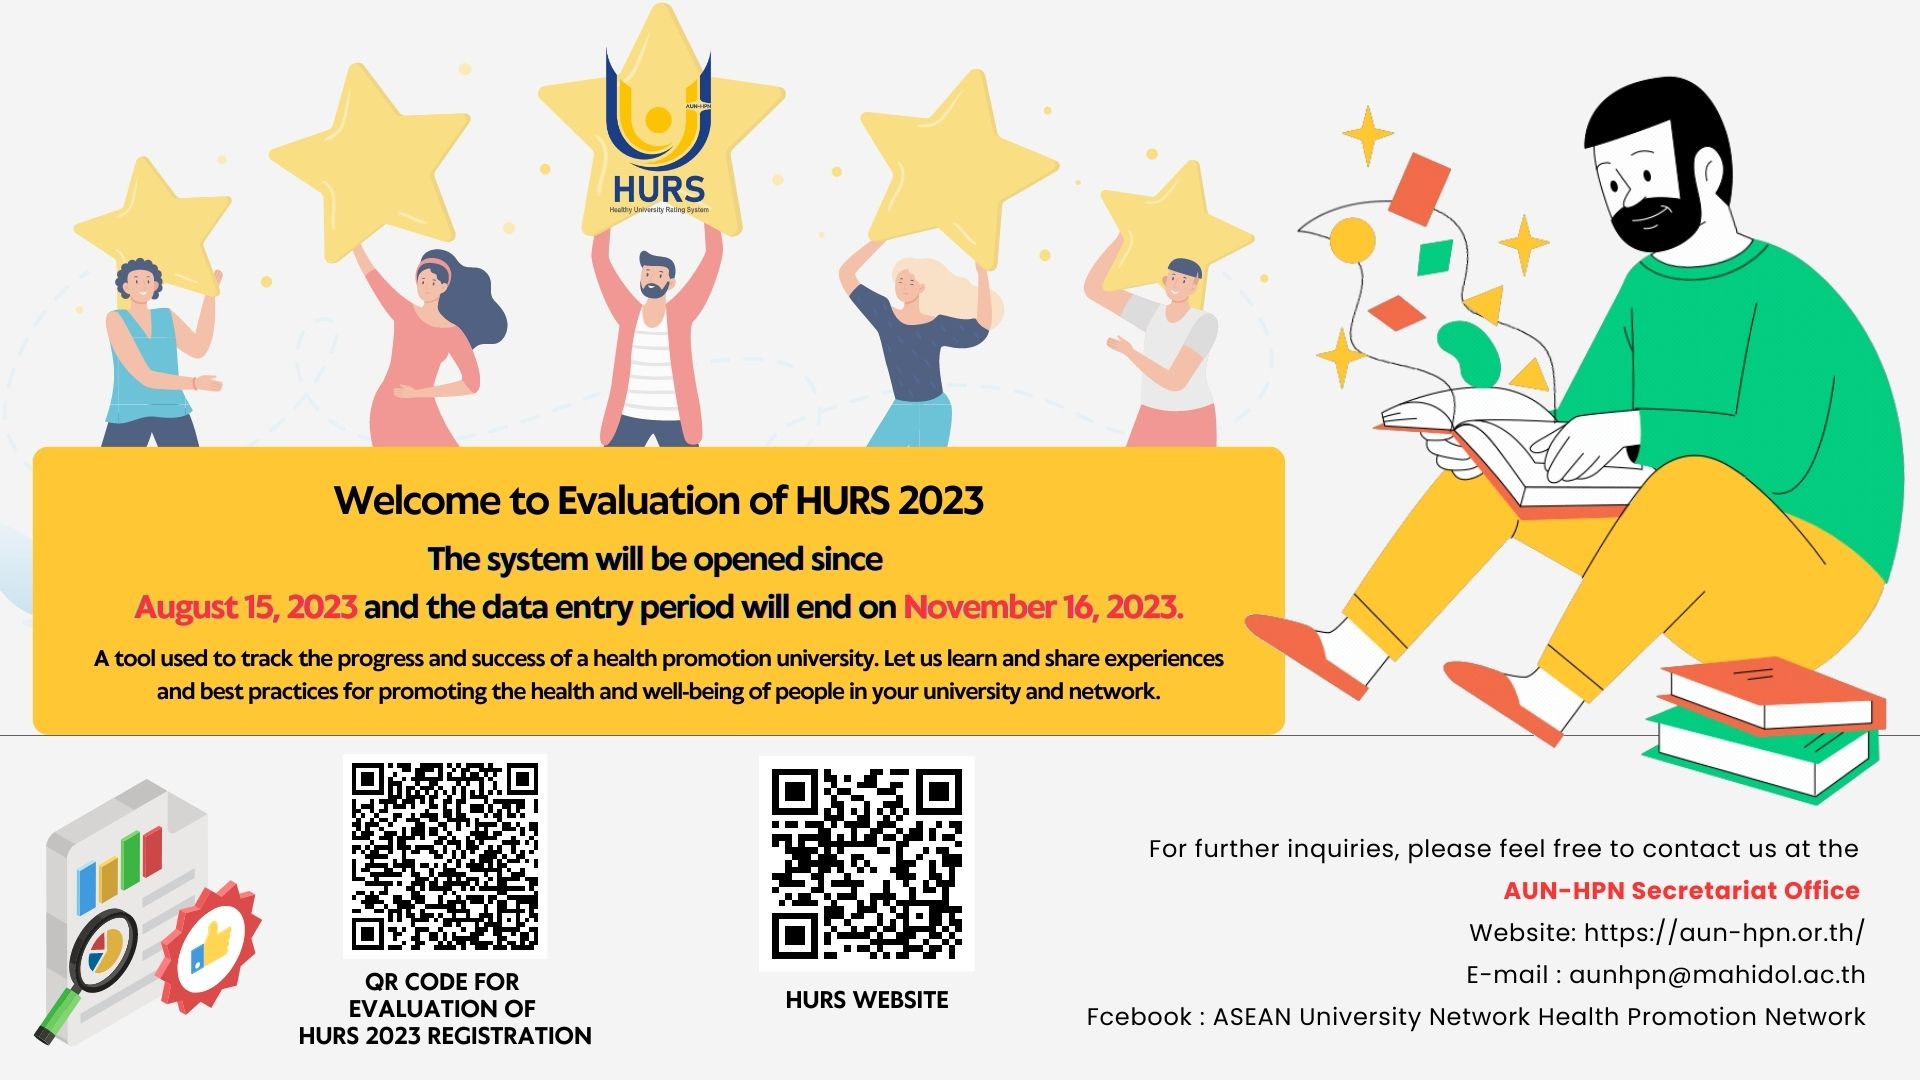 Welcome to Evaluation of HURS 2023